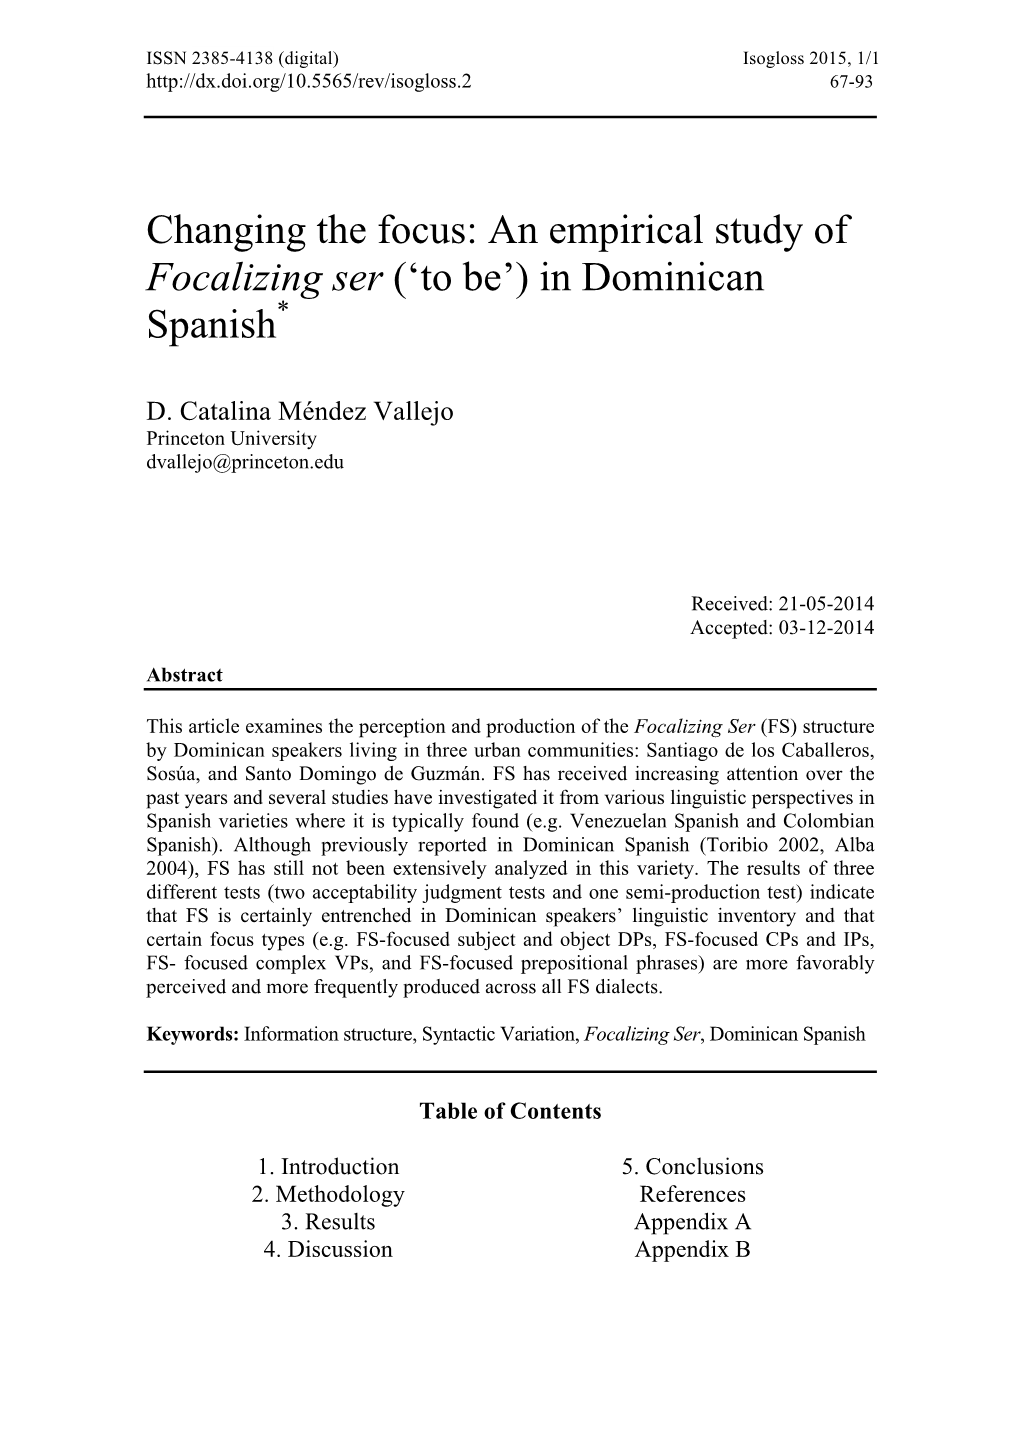 Changing the Focus: an Empirical Study of Focalizing Ser ('To Be') In